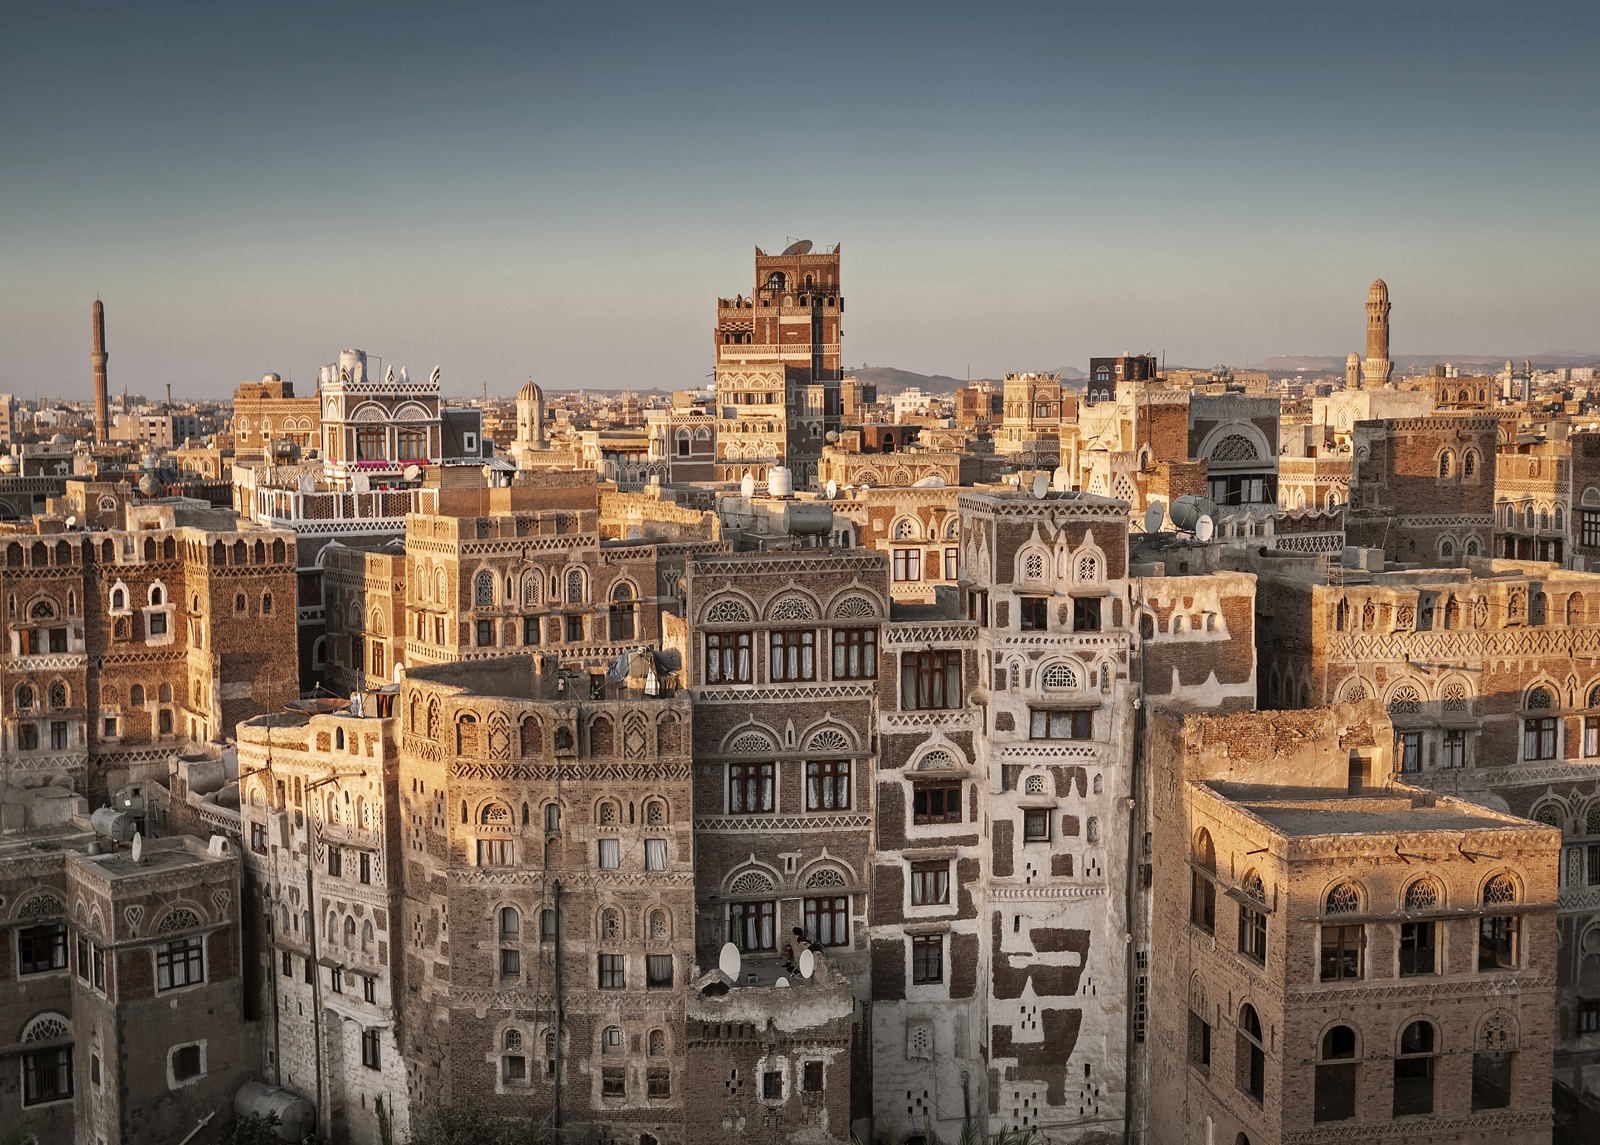 Asian Cities Quiz 🏞️: Can You Identify Them From One Photo? (II) Sana'a, Yemen